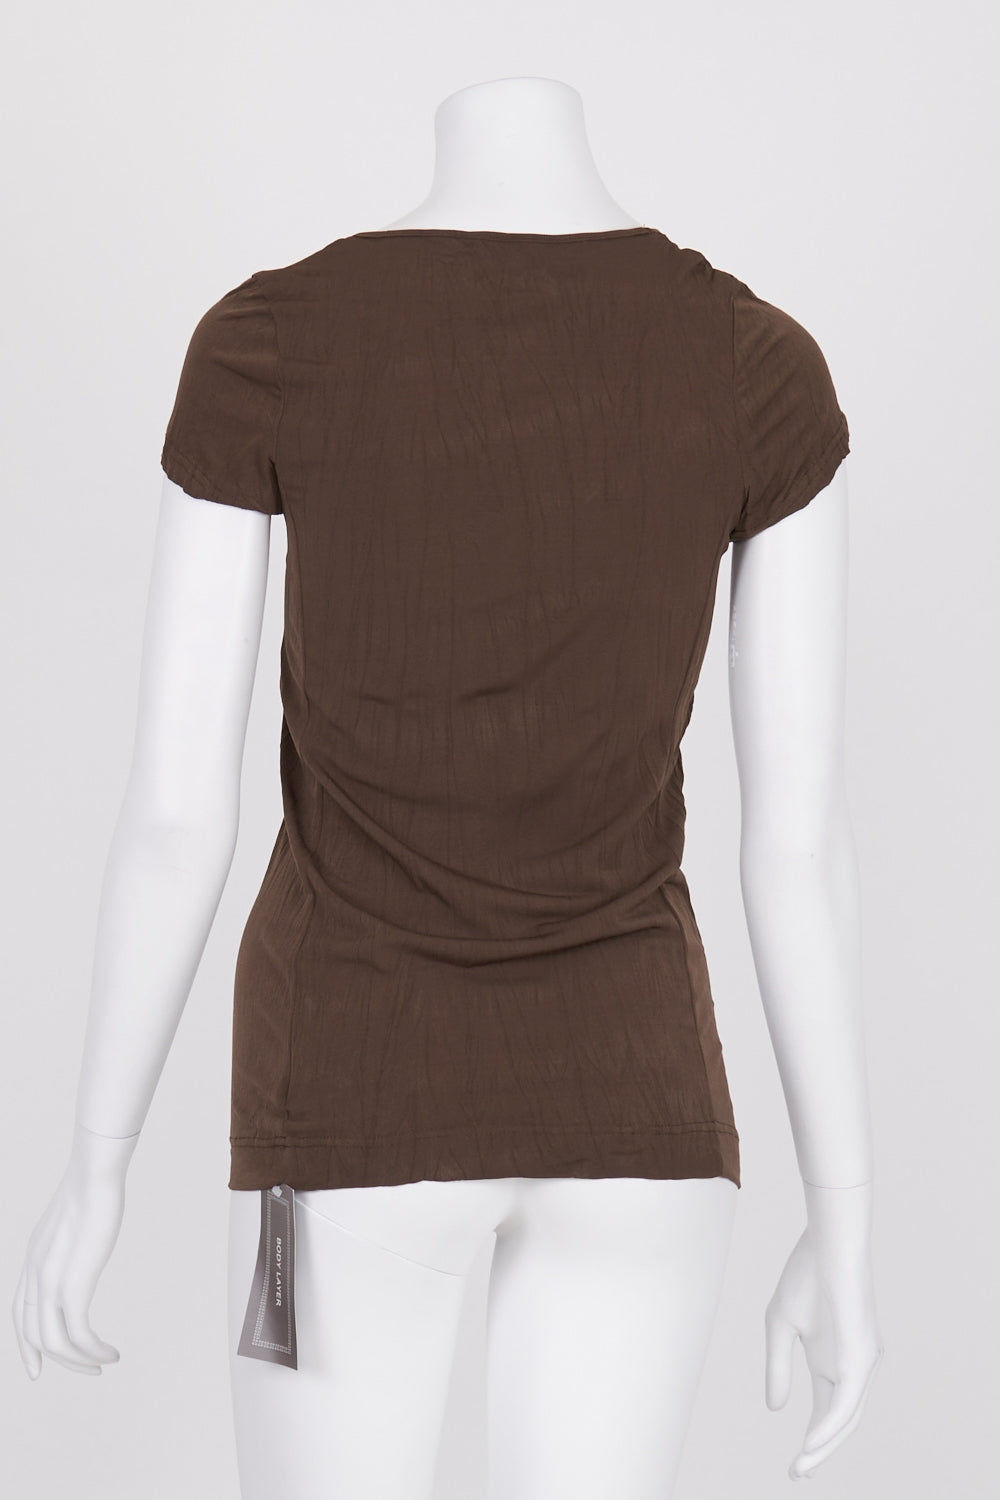 Body Layer Brown Short Sleeve Top 8